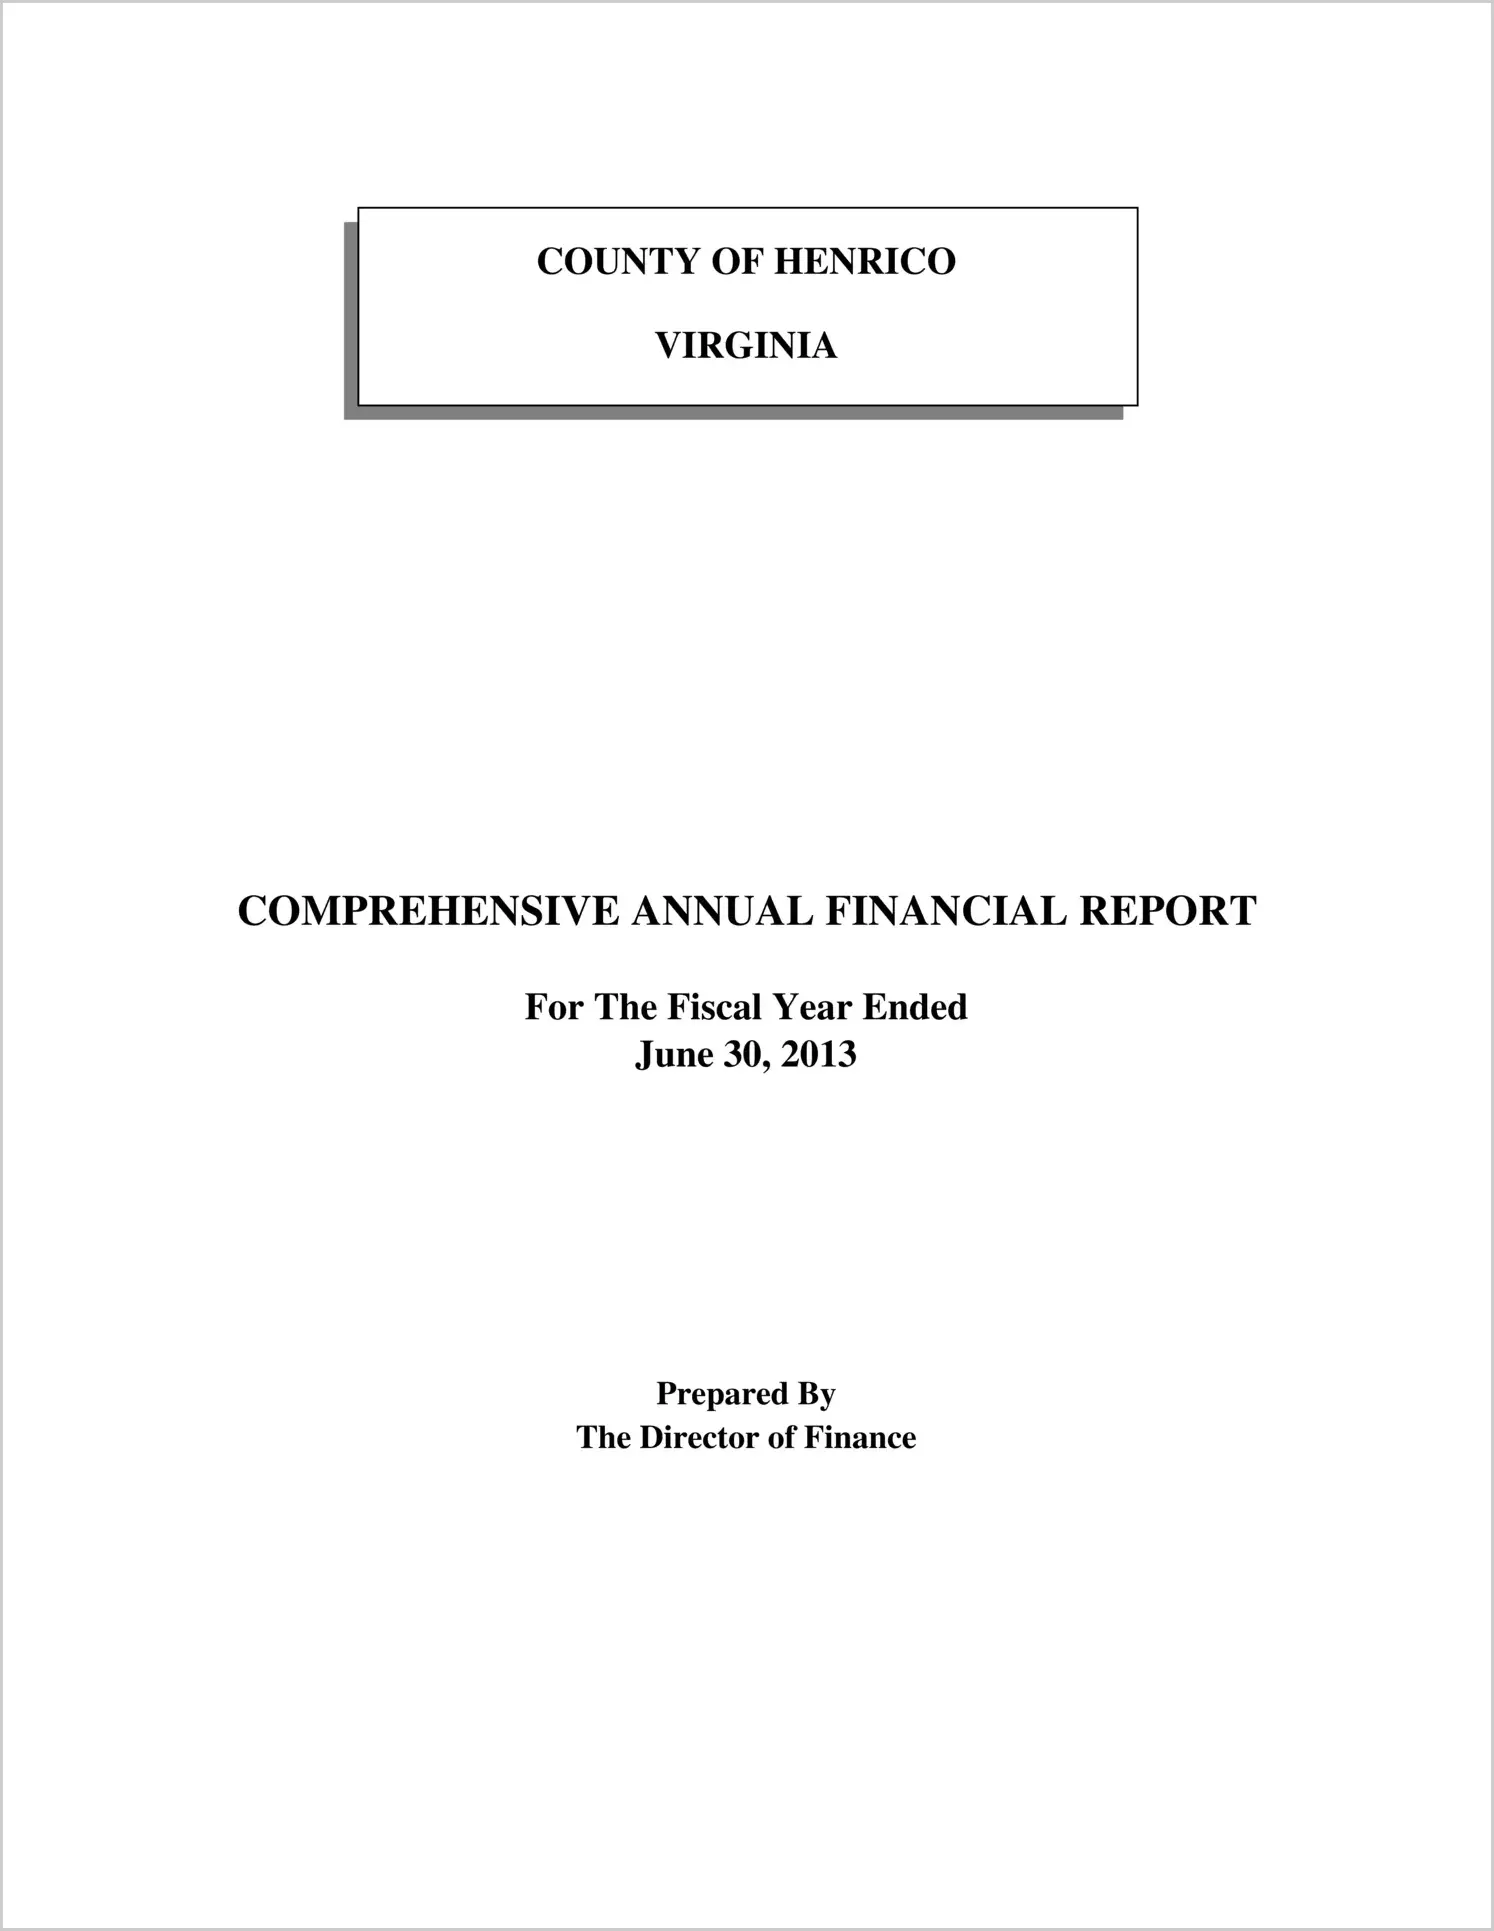 2013 Annual Financial Report for County of Henrico